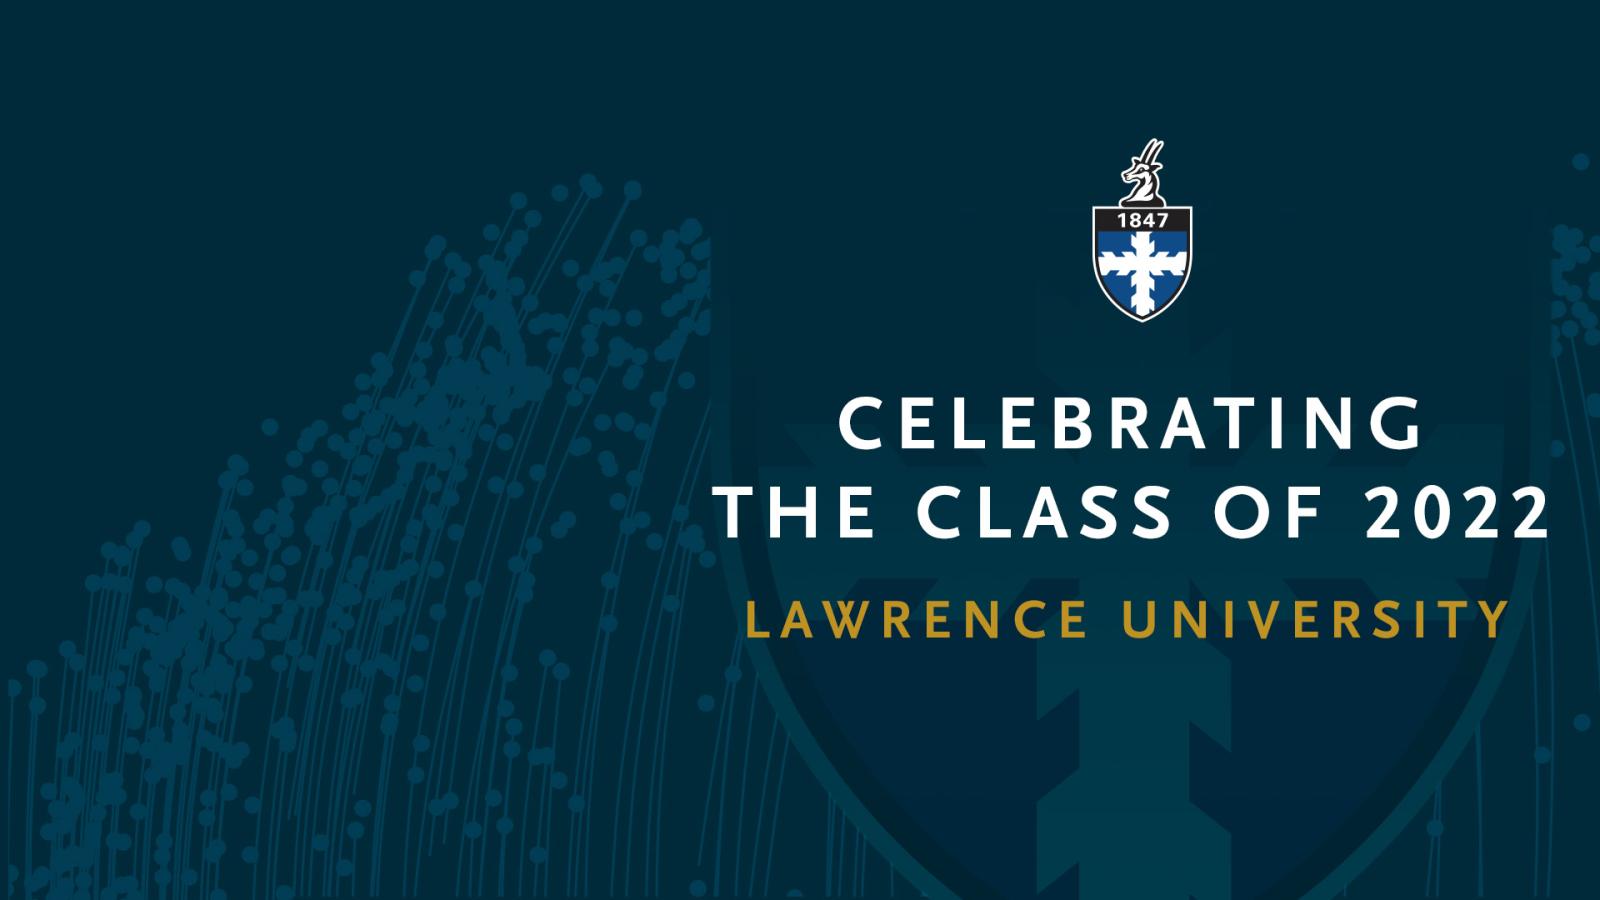 Lawrence University crest with words "celebrating the class of 2022 Lawrence University."